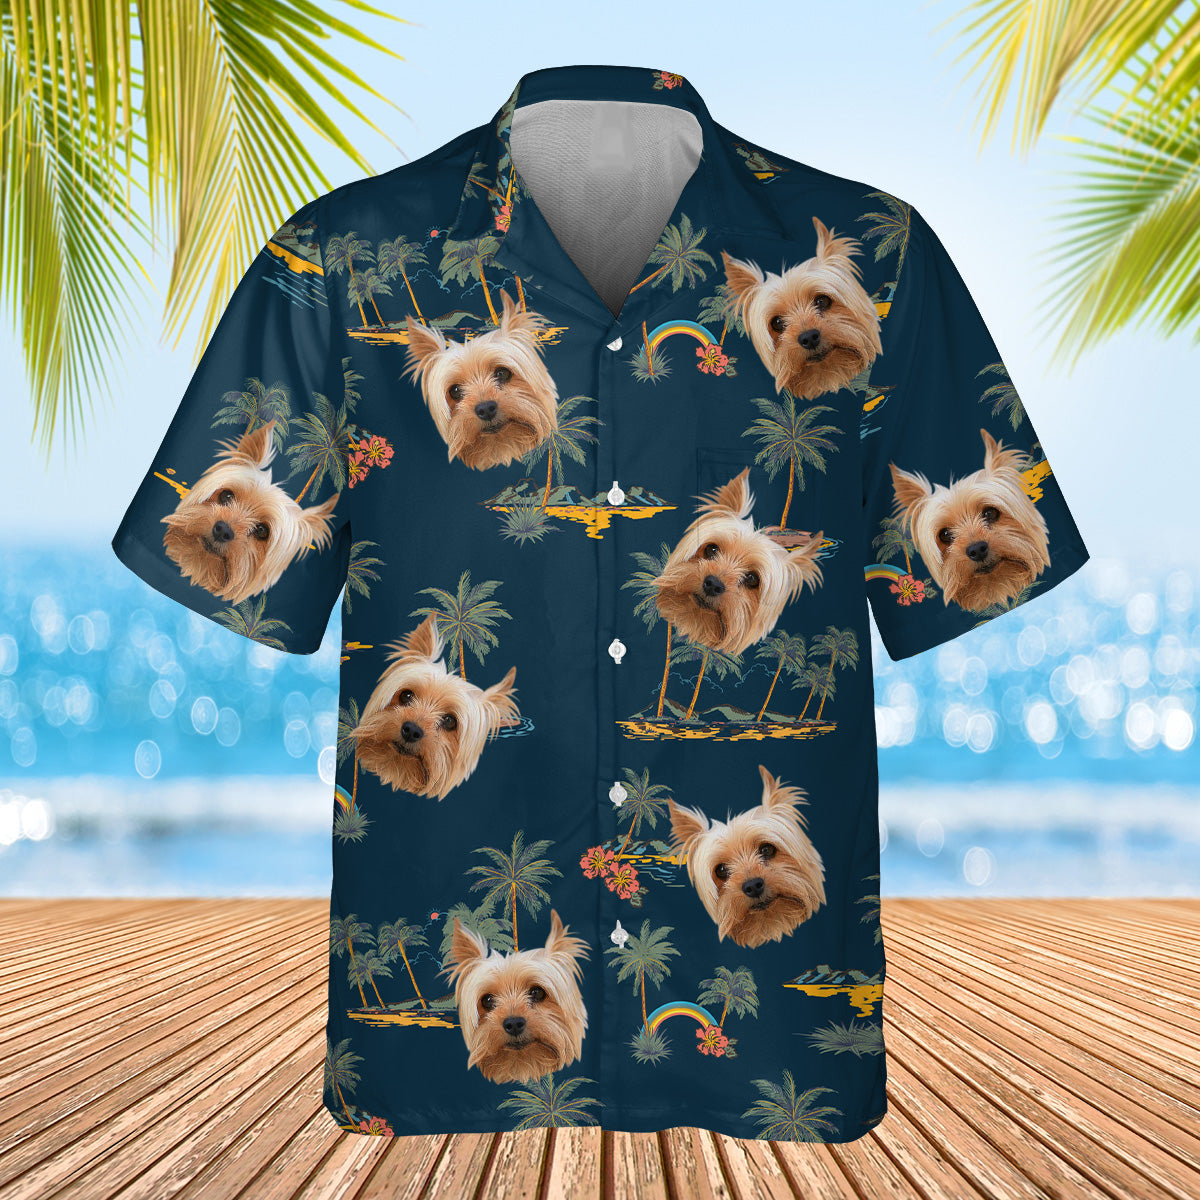 navy palm tree themed shirt with dogs